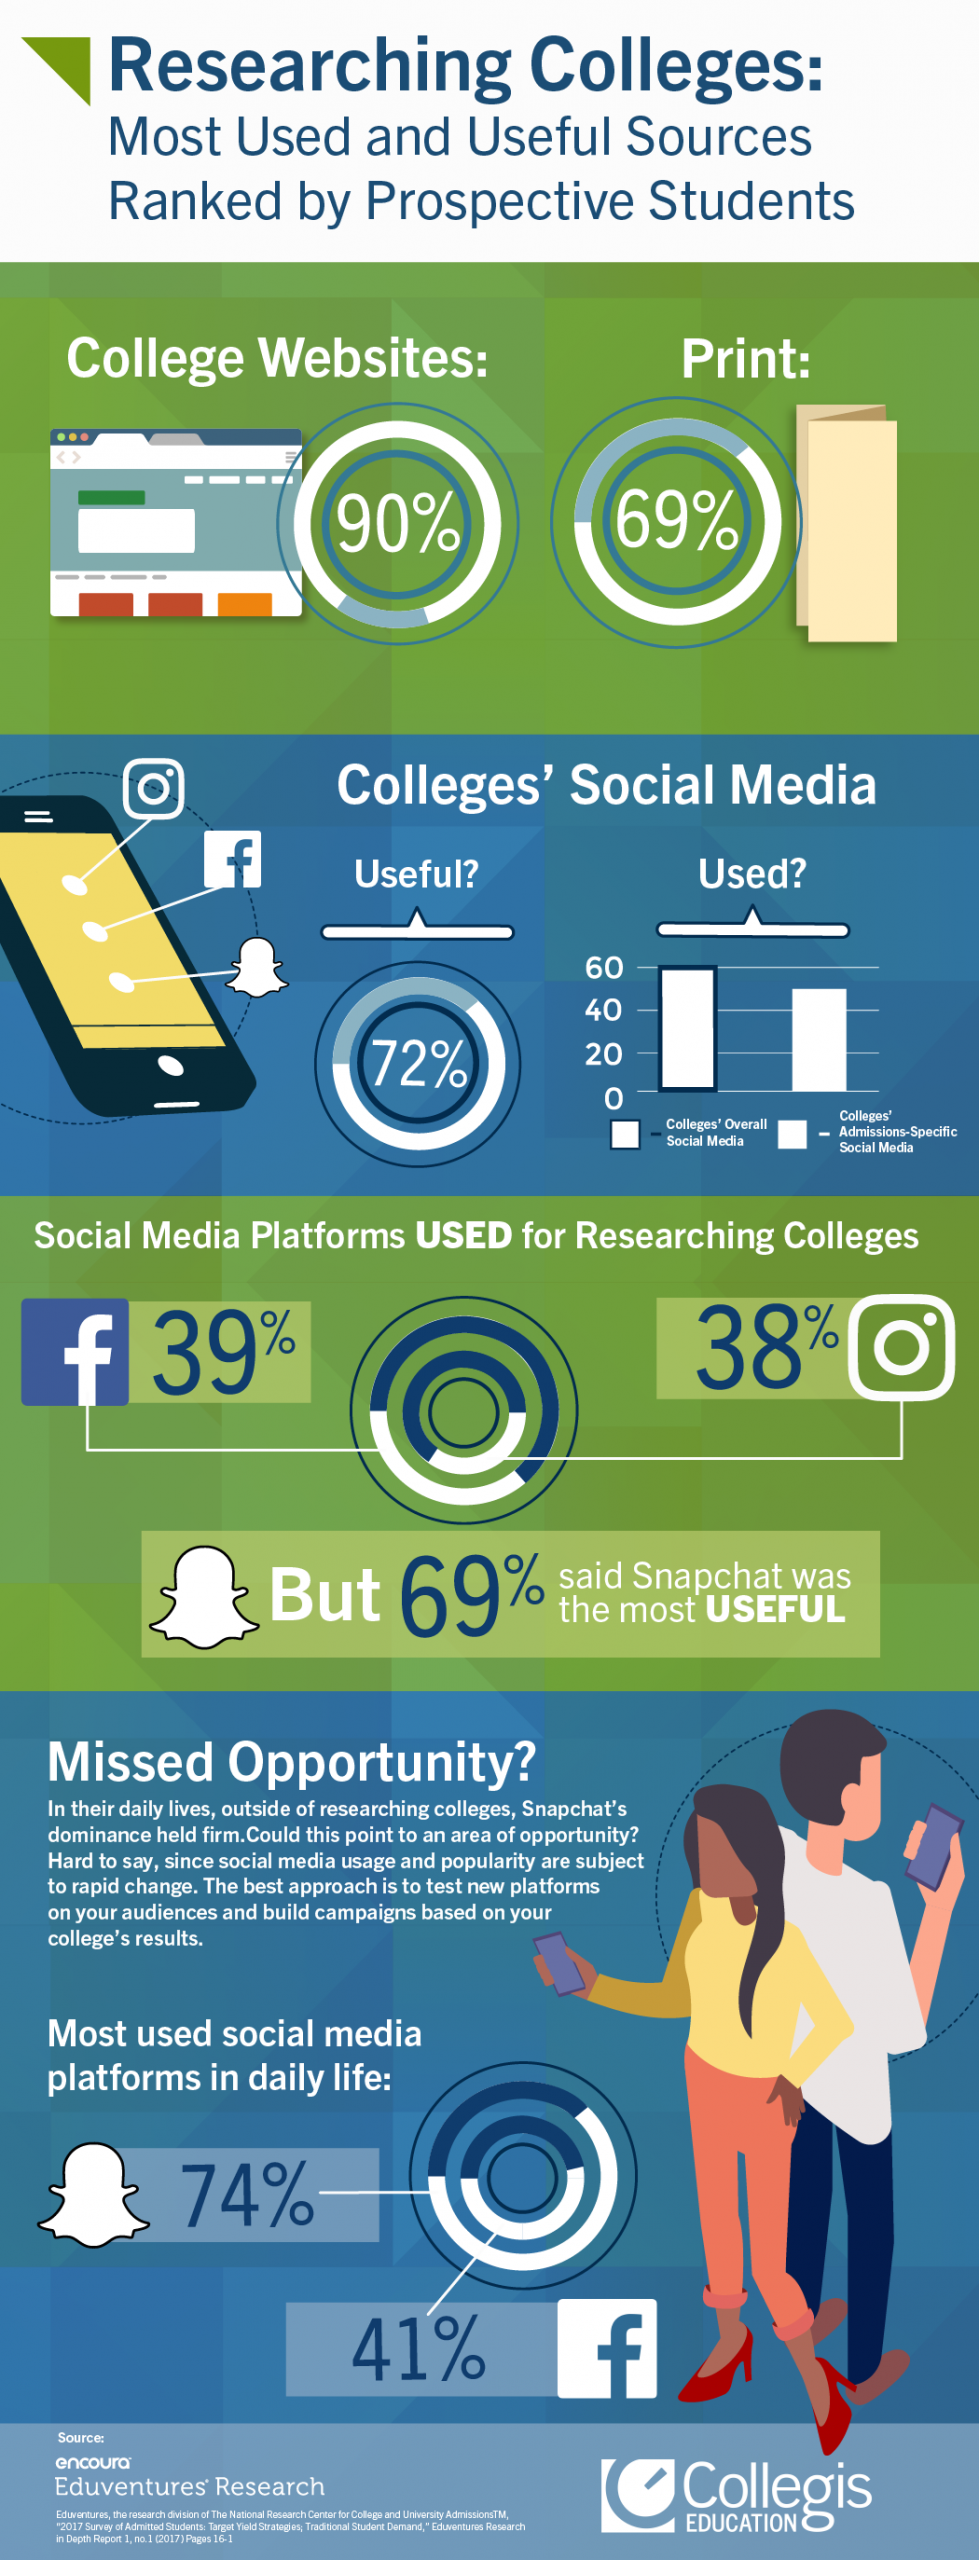 College Websites Ranked Most Useful Source by Prospective Students Infographic